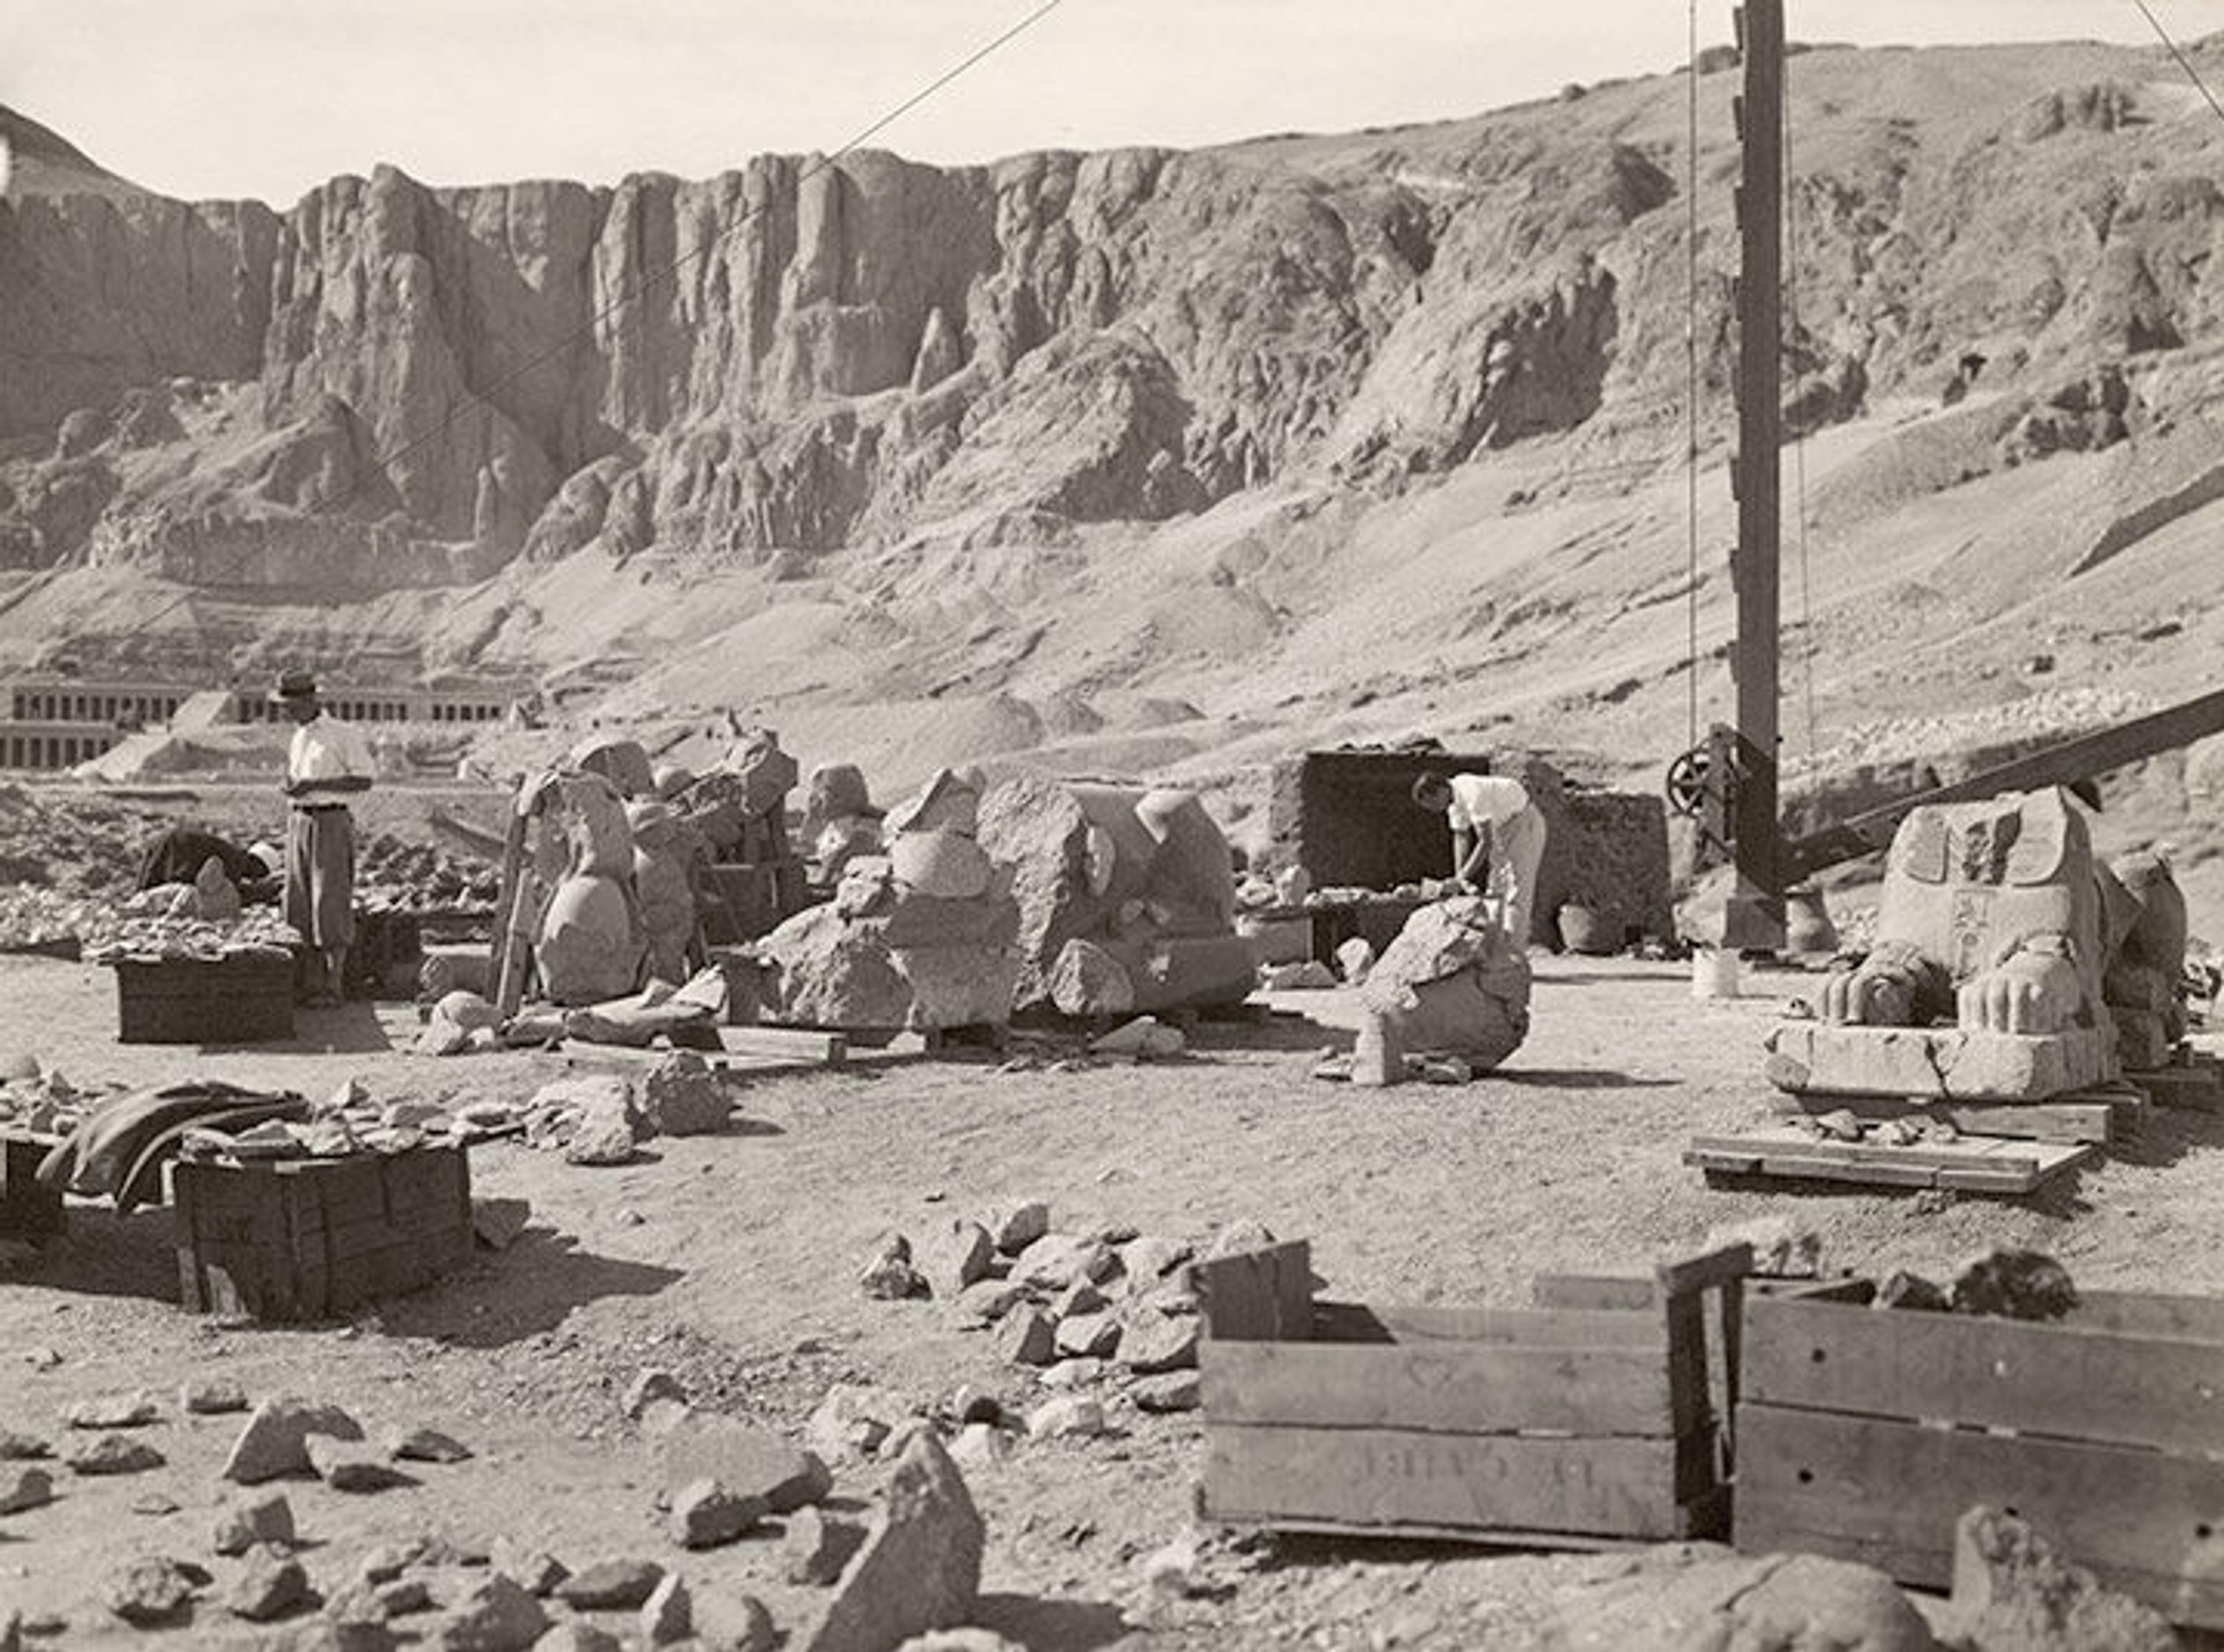 Excavators from an 1928–29 expedition at Deir el-Bahri sorting fragments of granite statues